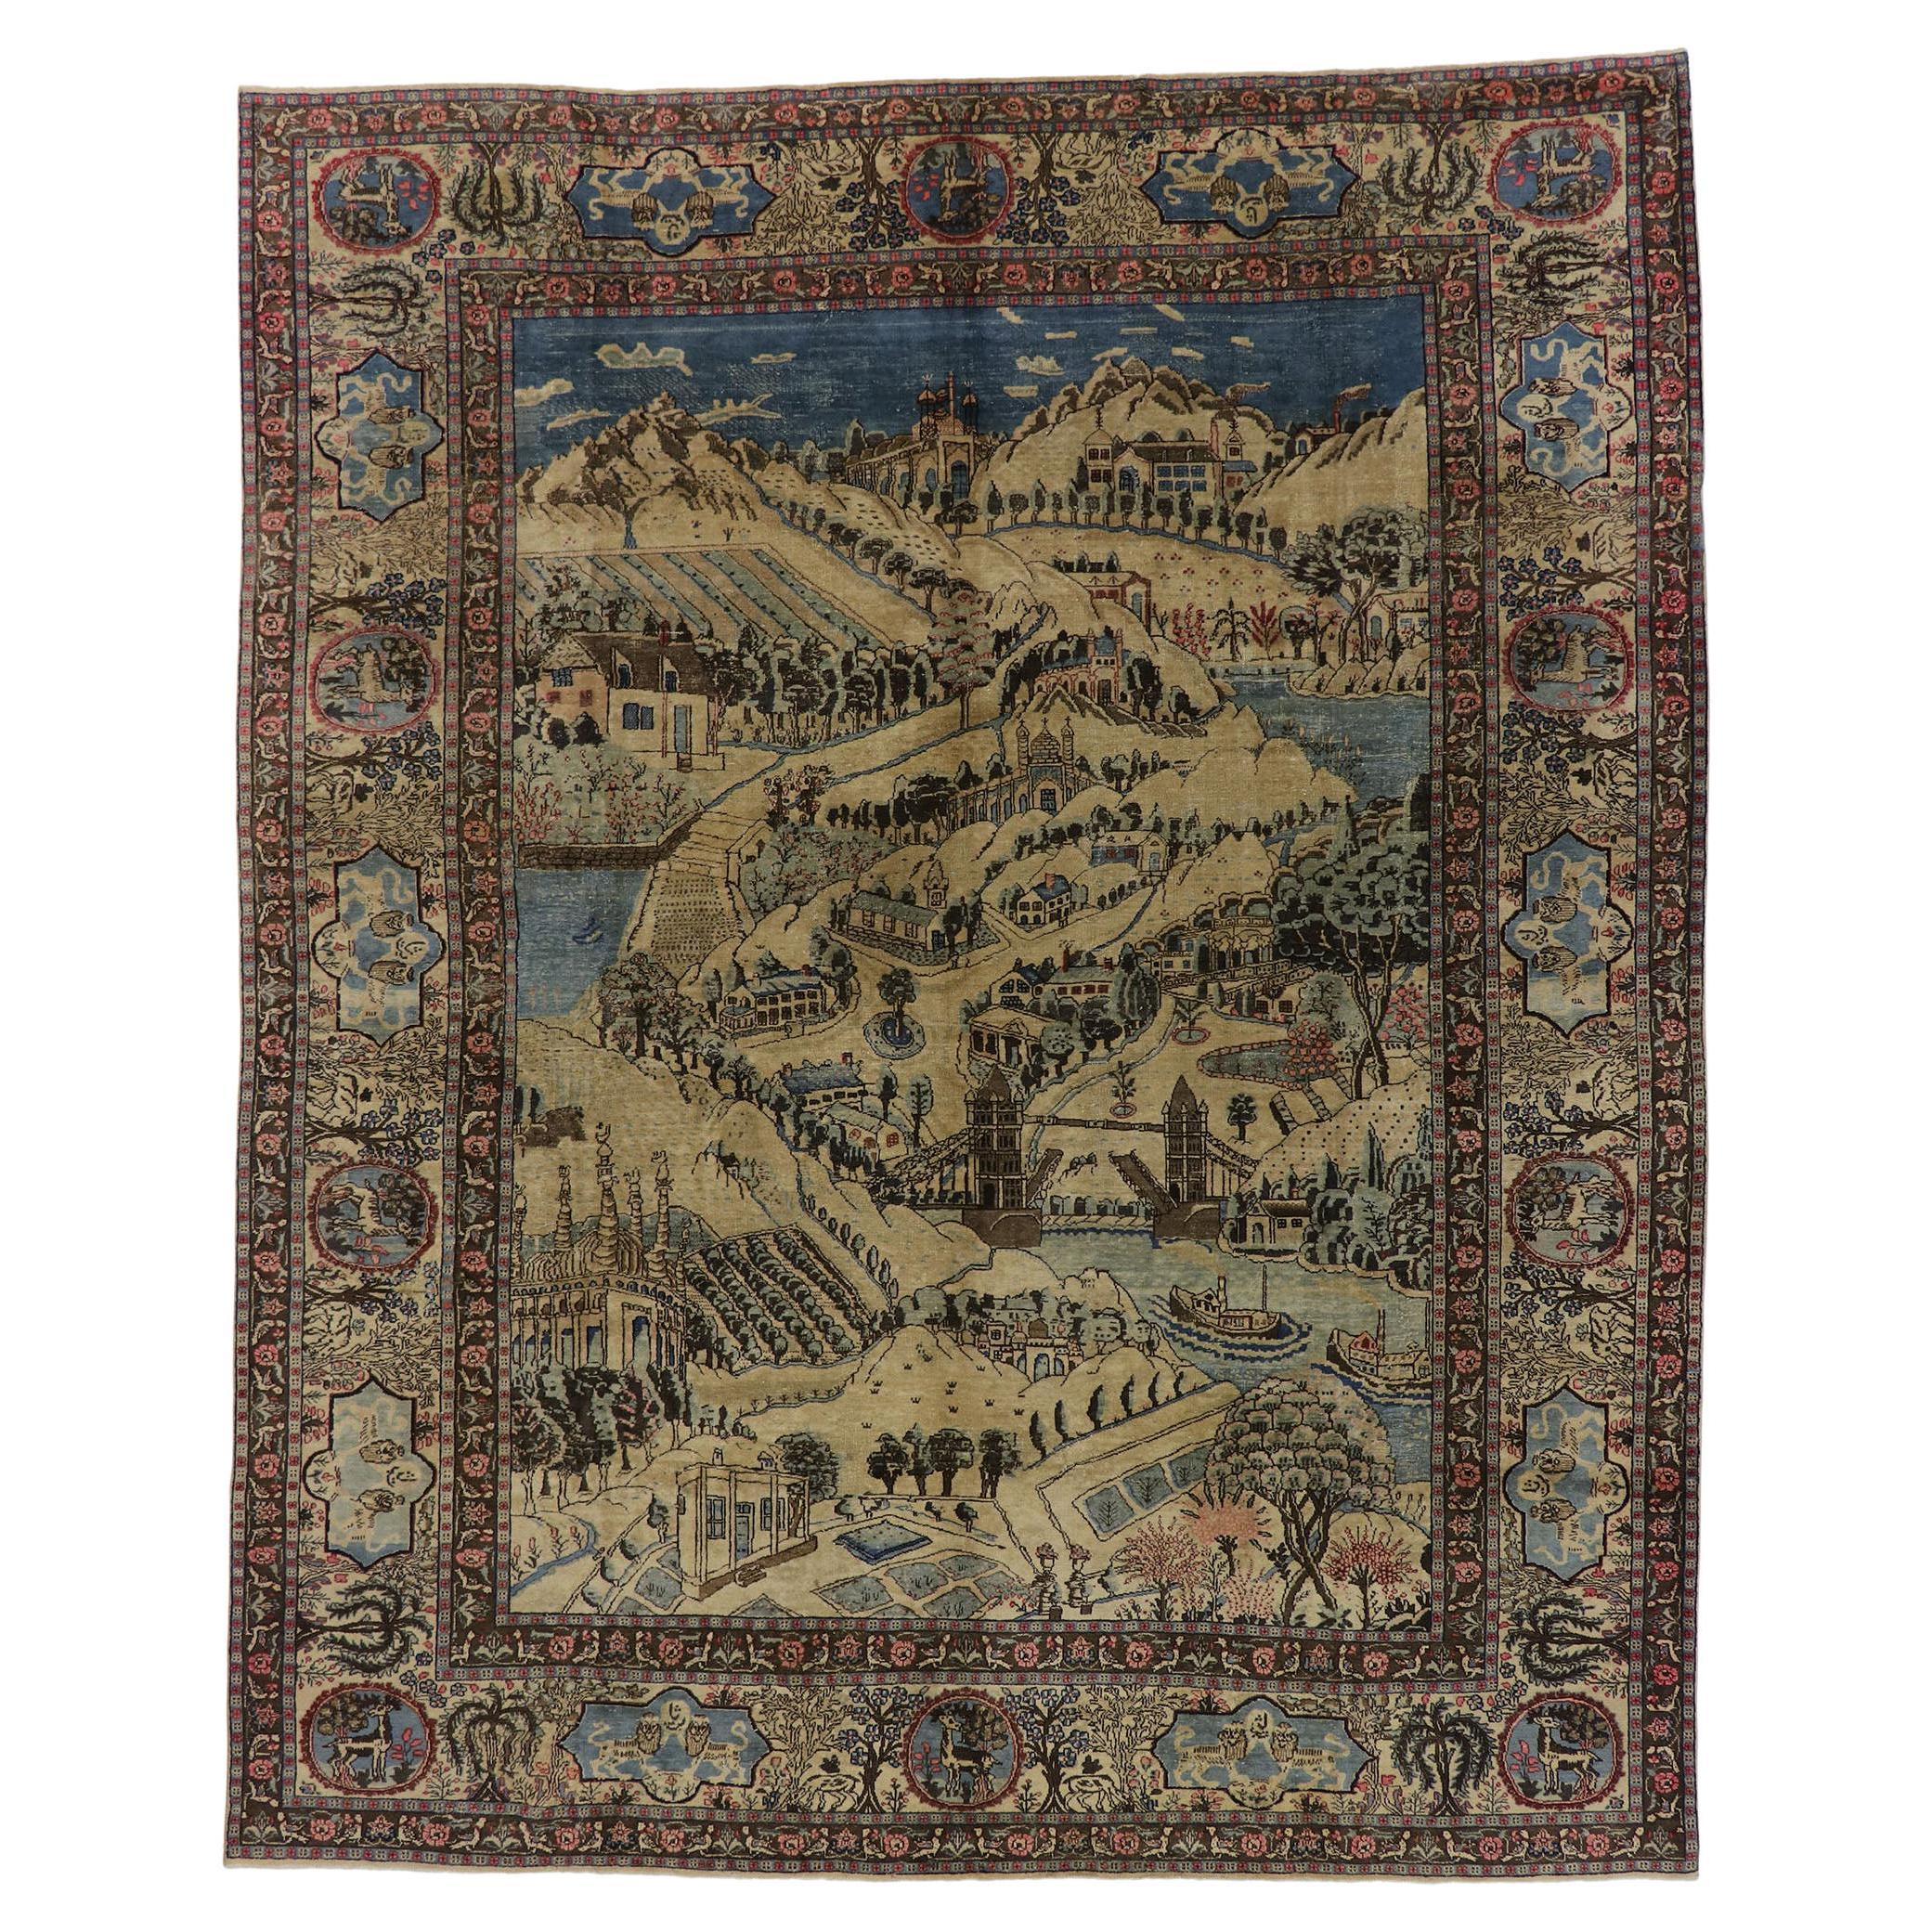 Distressed Antique Persian Tabriz Pictorial Rug with Cartouche Border